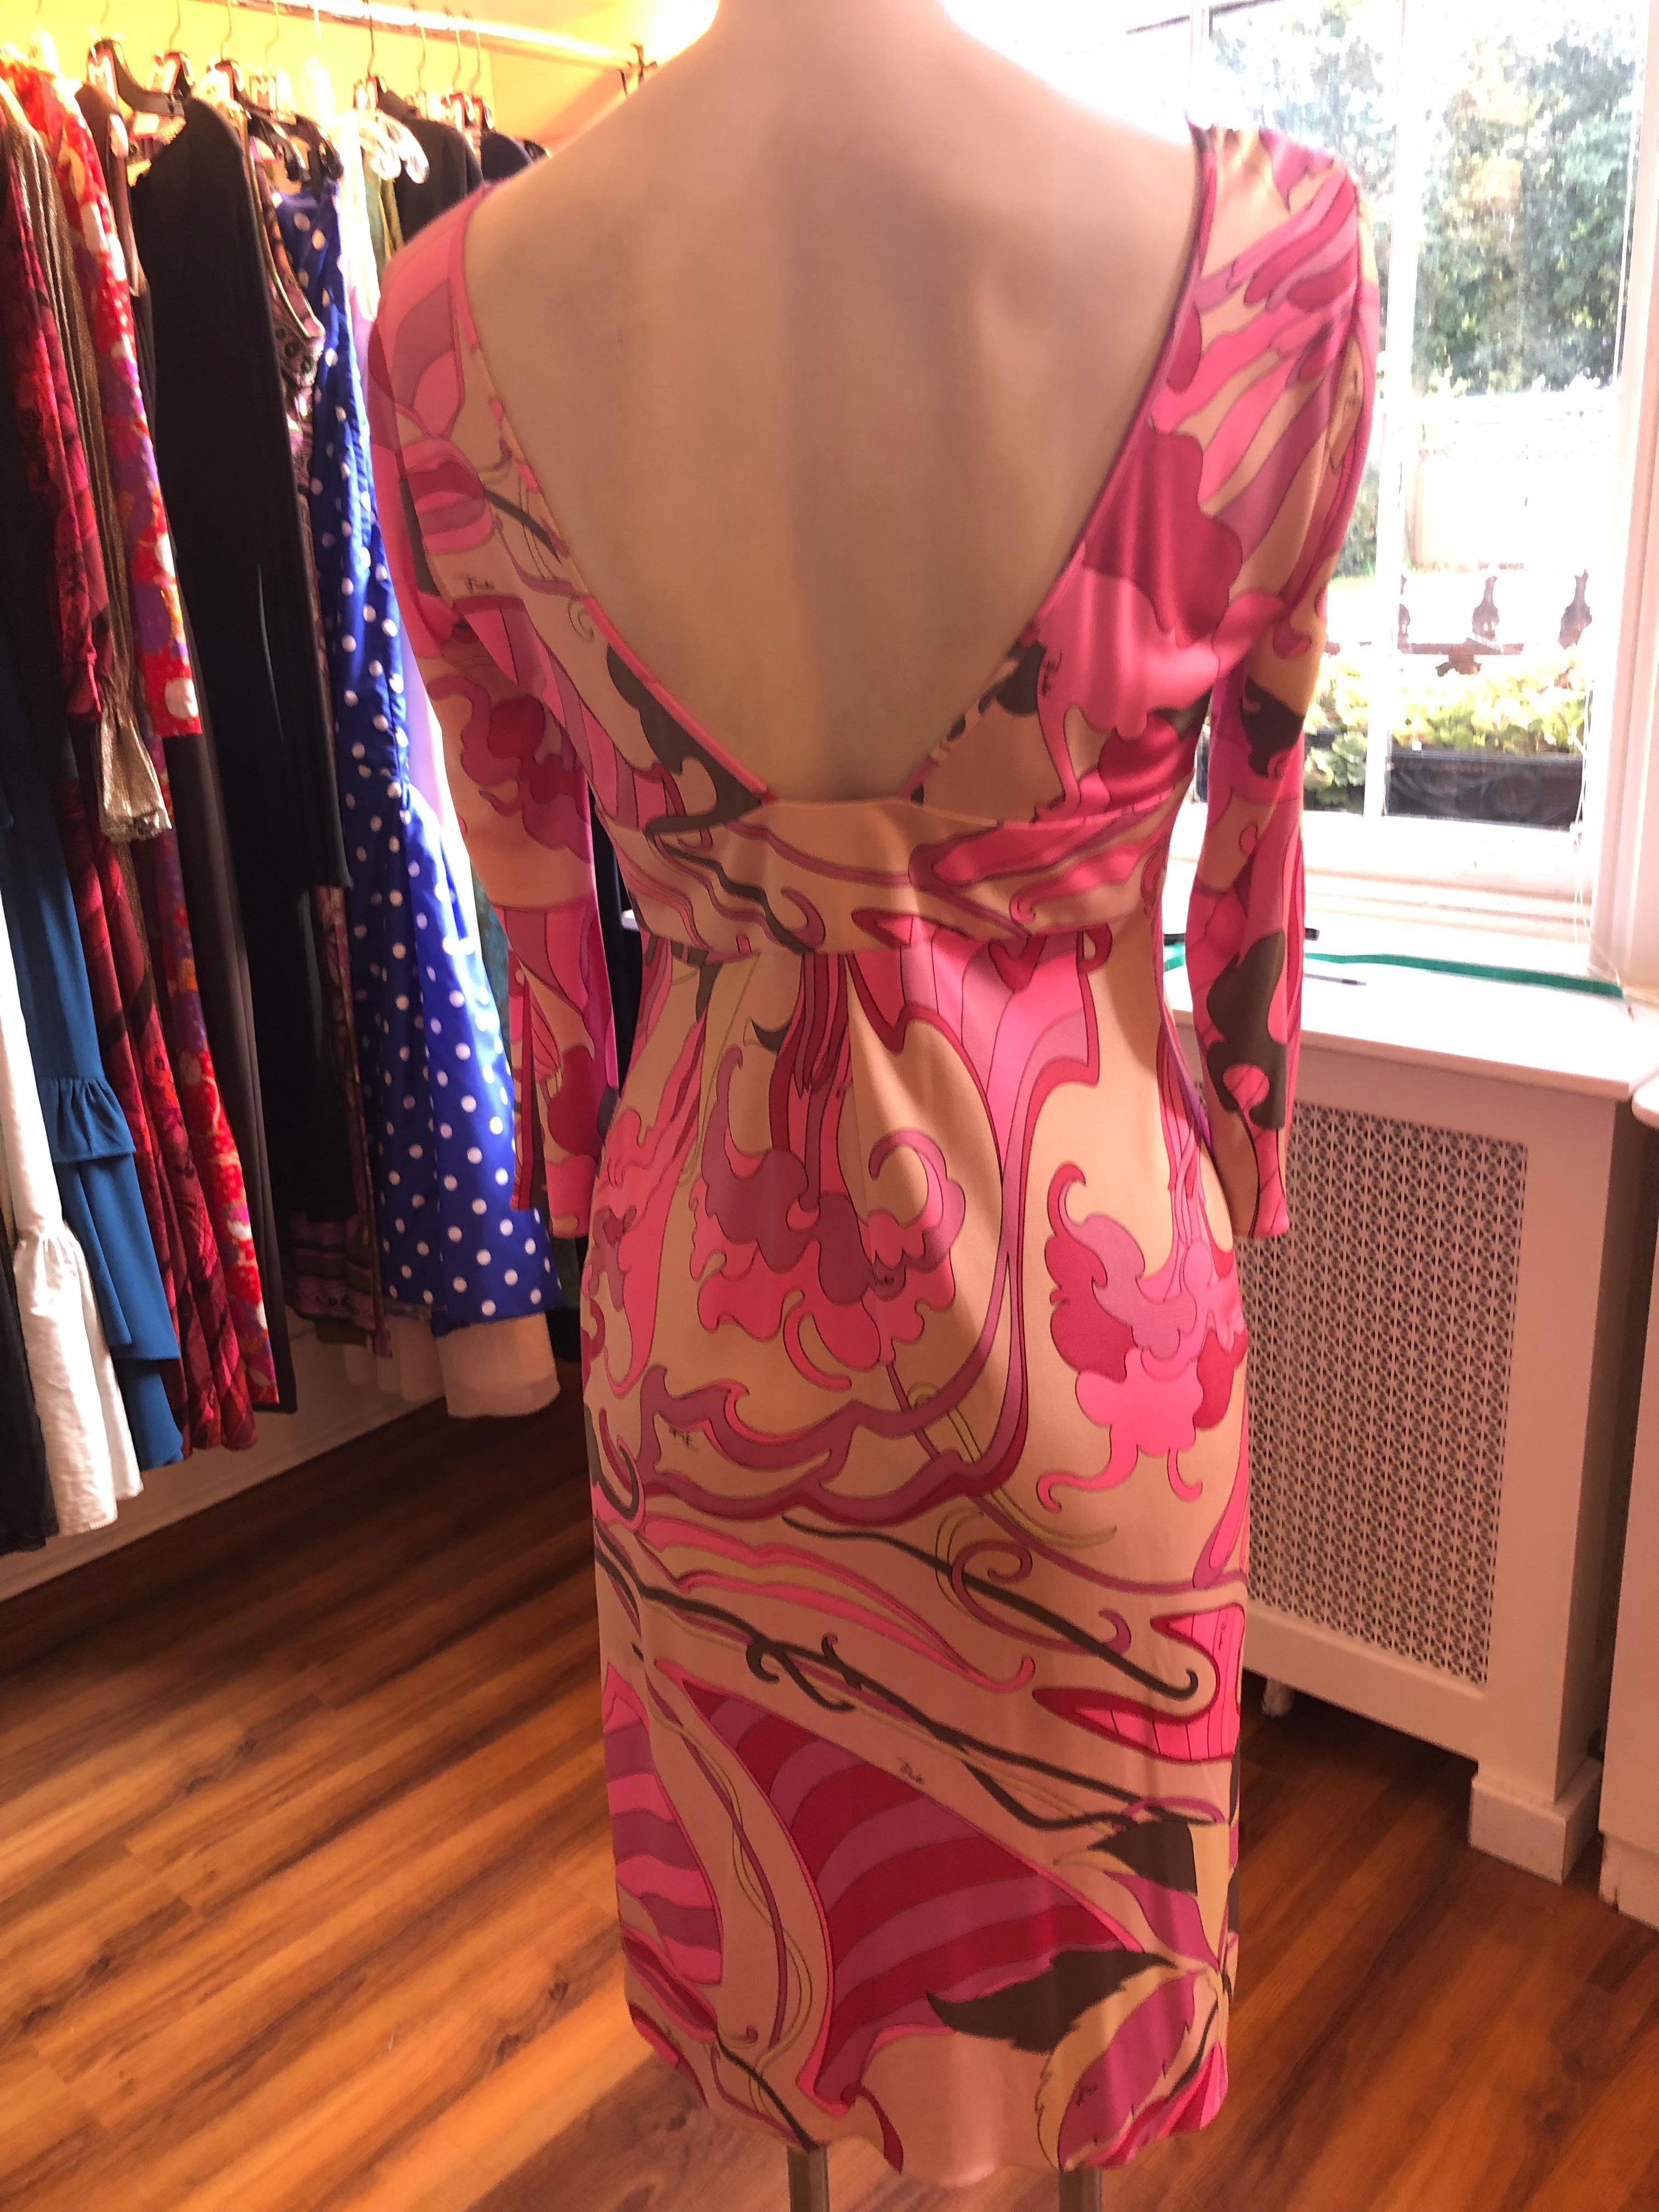 Nice combination of a V-neck top with a band under the bust and a v/u shaped back. This silk dress has an abstract floral patter with the predominant colors being pink, purple with a cream background and dashes of soft yellow and grey.